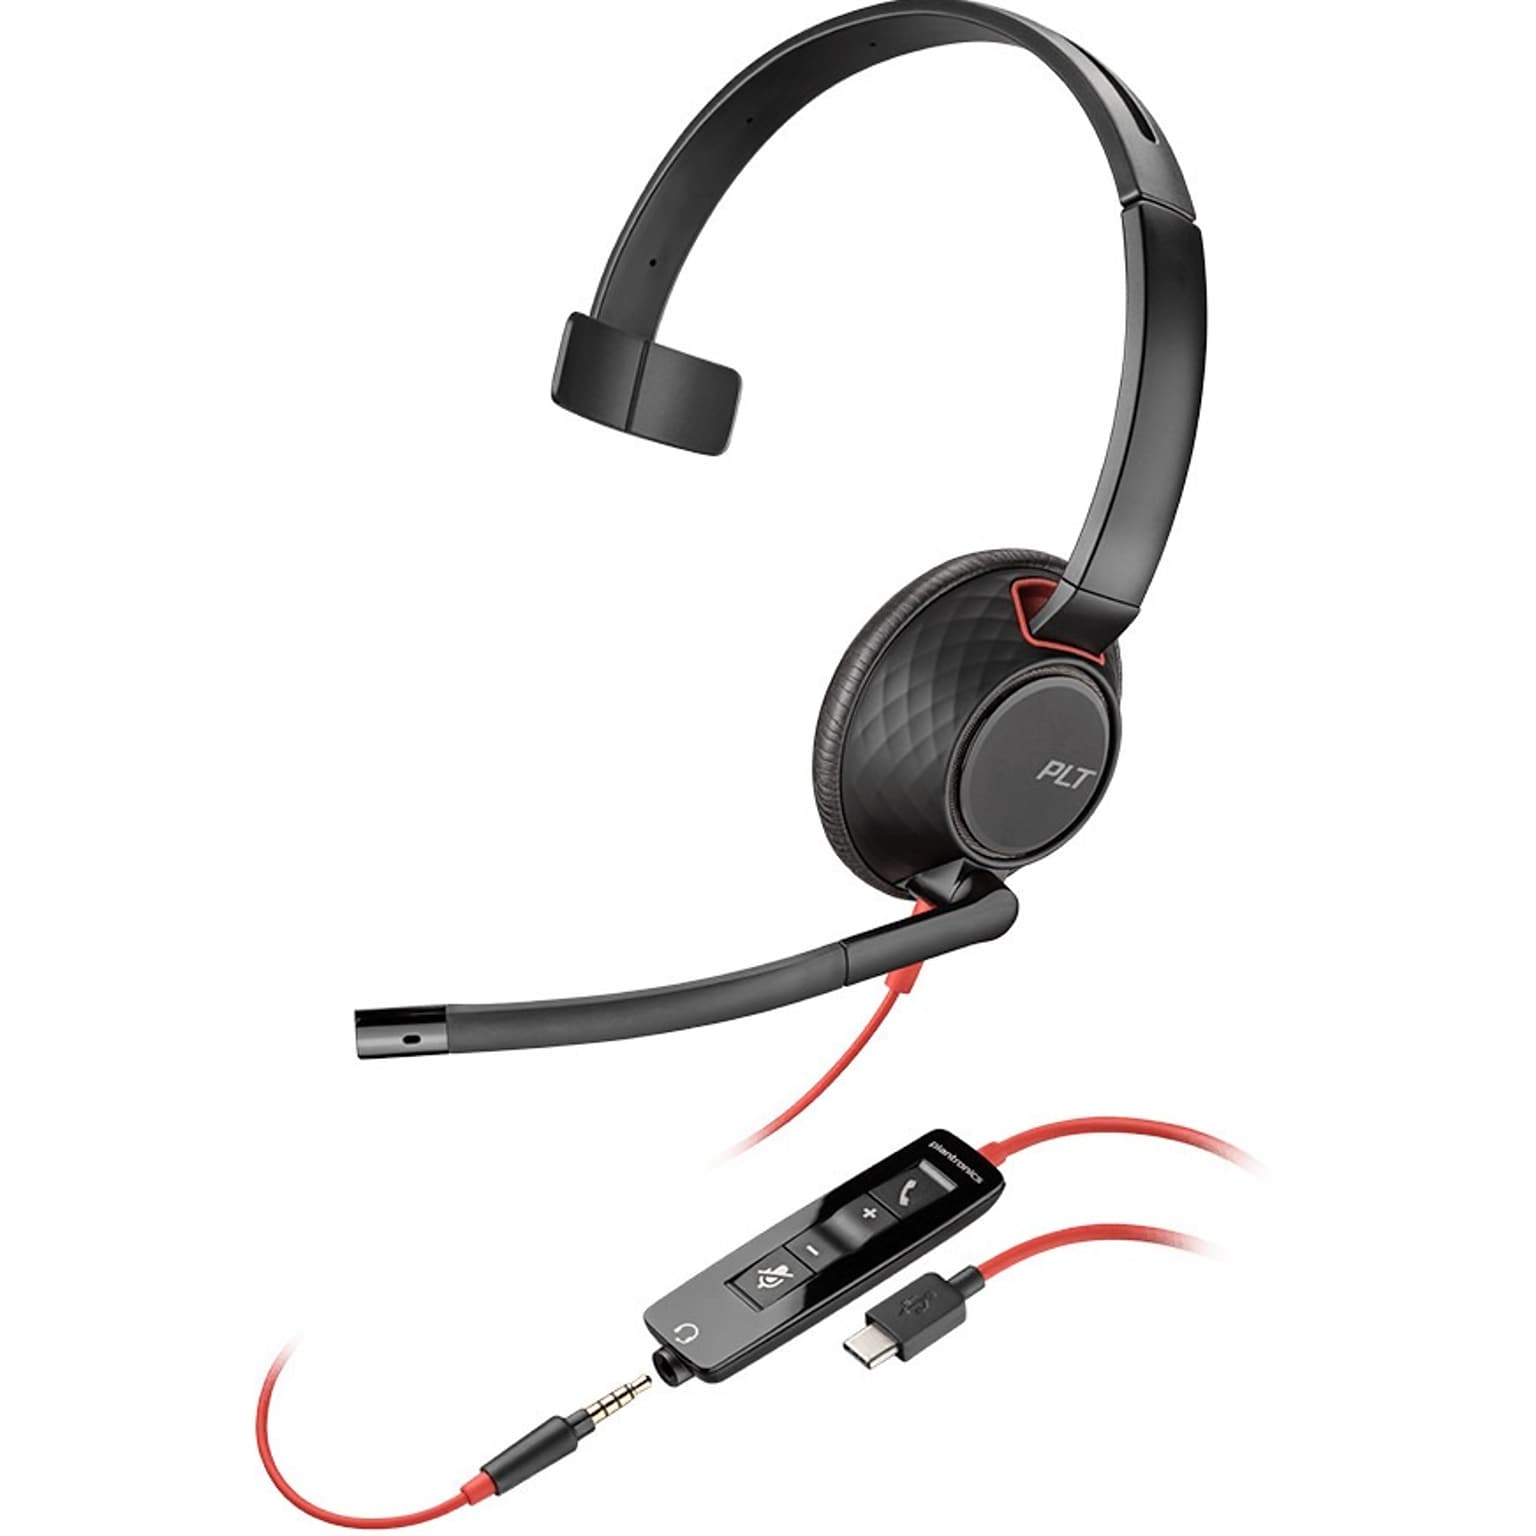 Plantronics Blackwire 5200 Wired Noise Canceling Mono On Ear Computer Headset, Black (207587-01)